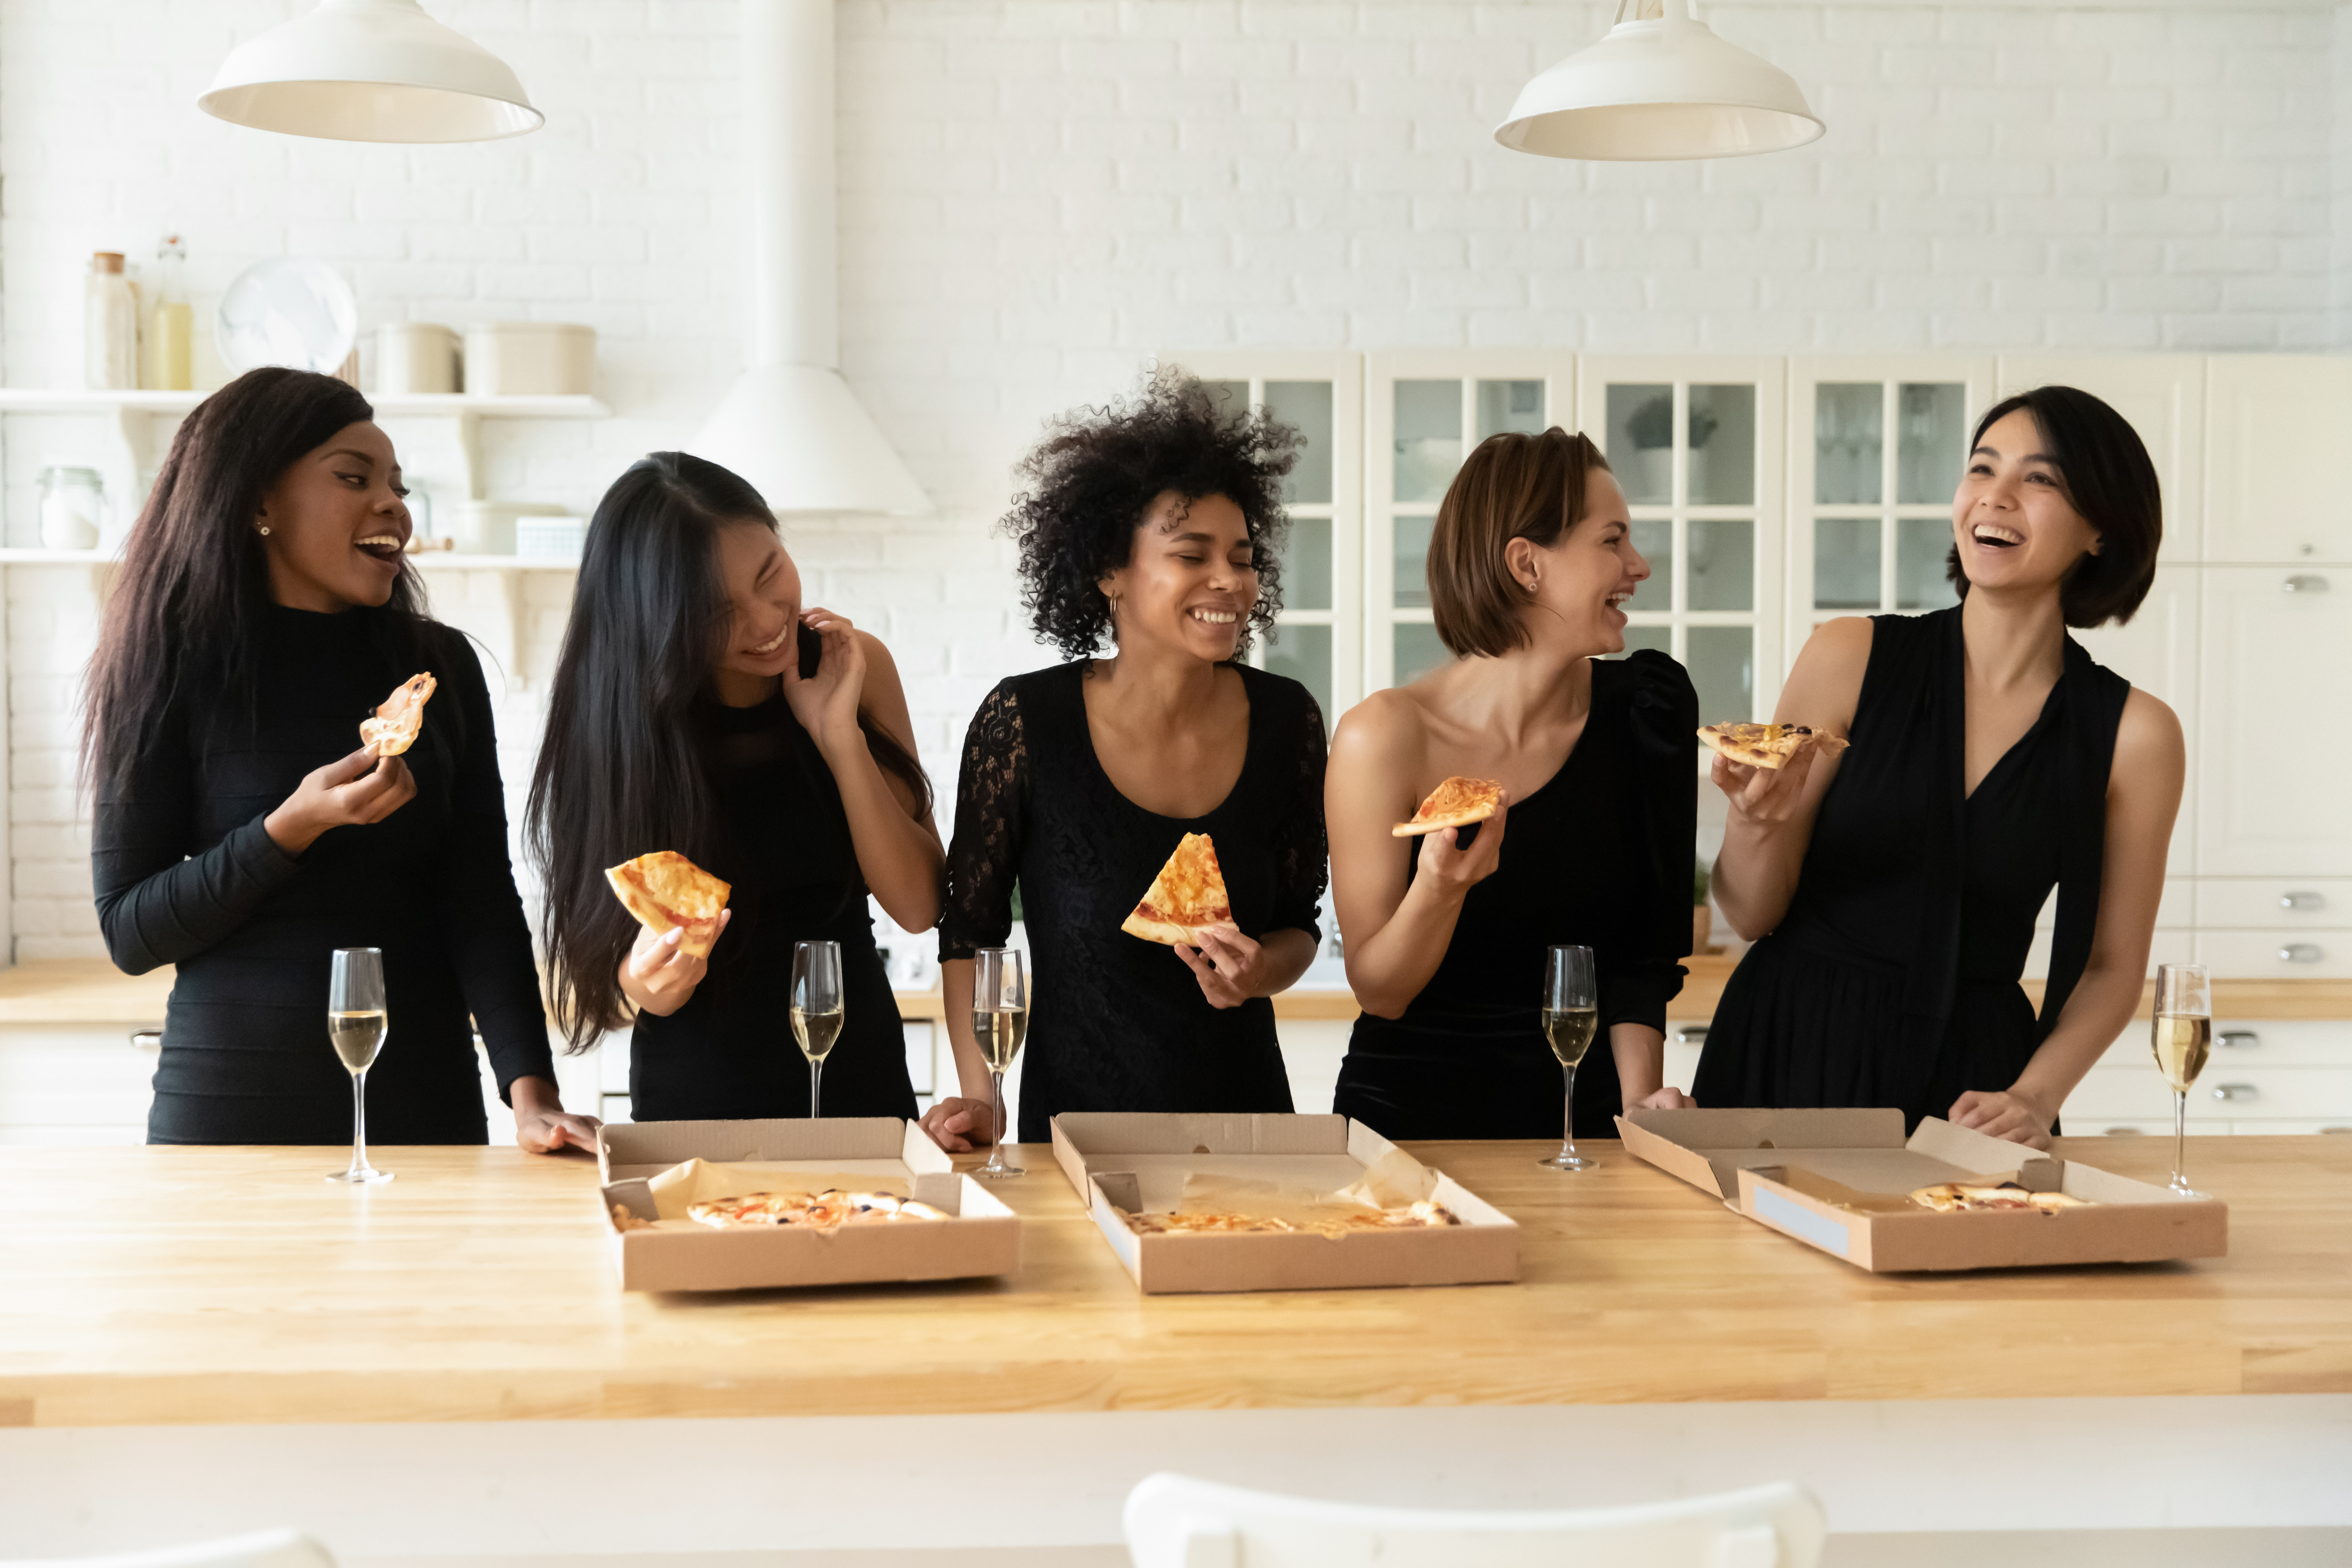 Women wearing black eating pizza and drinking champagne | Source: Shutterstock